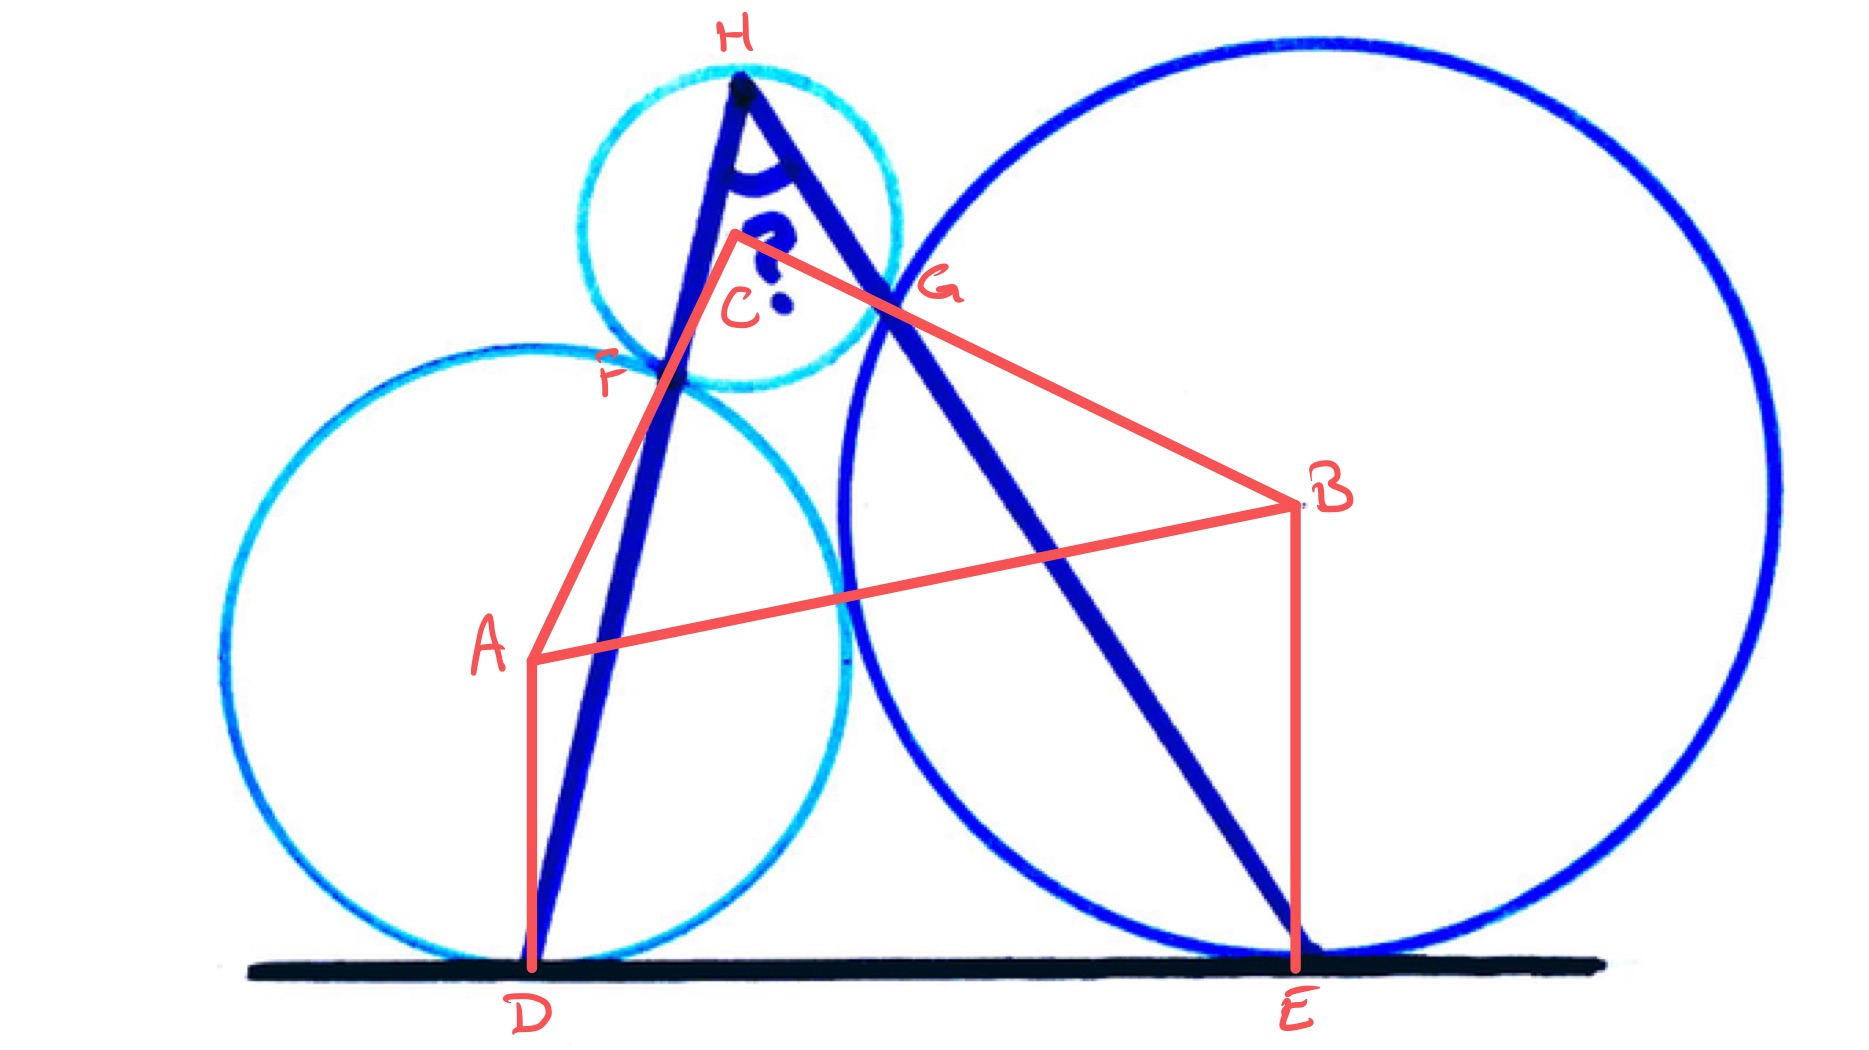 Three circles forming a triangle labelled